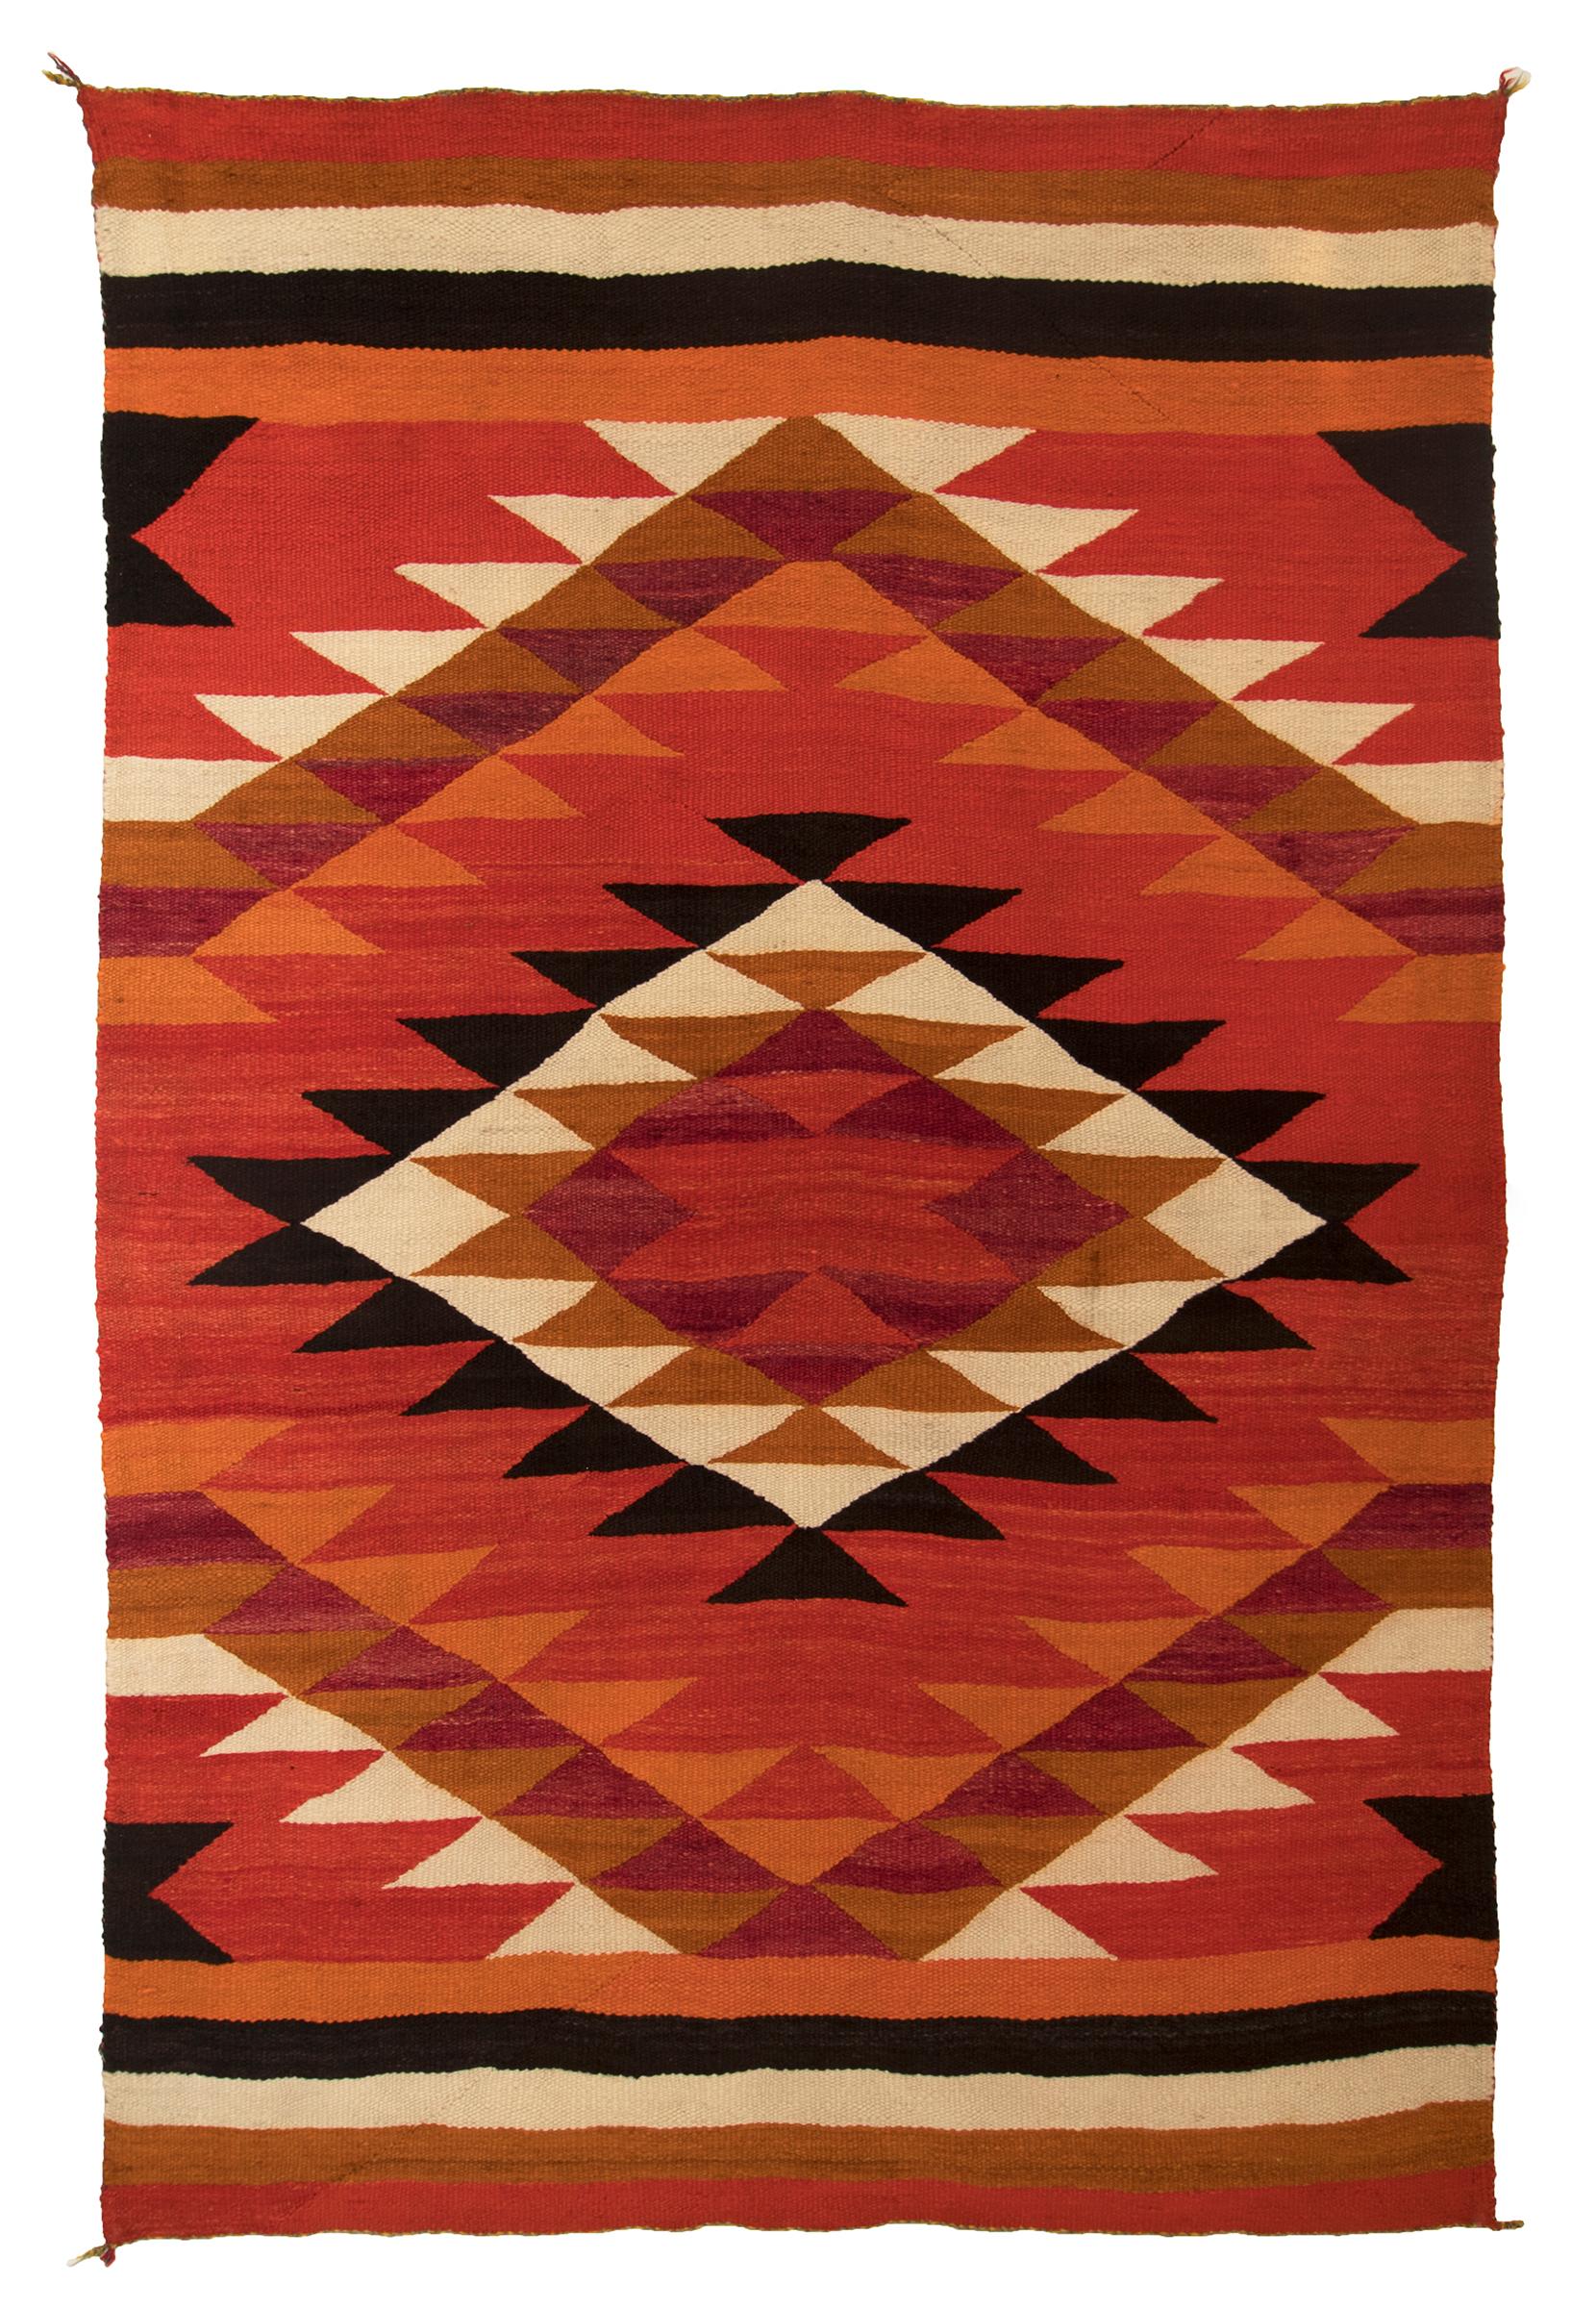 Vintage 19th century (circa 1880) Late Classic/Transitional period Navajo textile in a wearing blanket format. Woven of native hand-spun wool in a diamond and banded pattern with aniline red, orange maroon/purple and brown with natural fleece colors